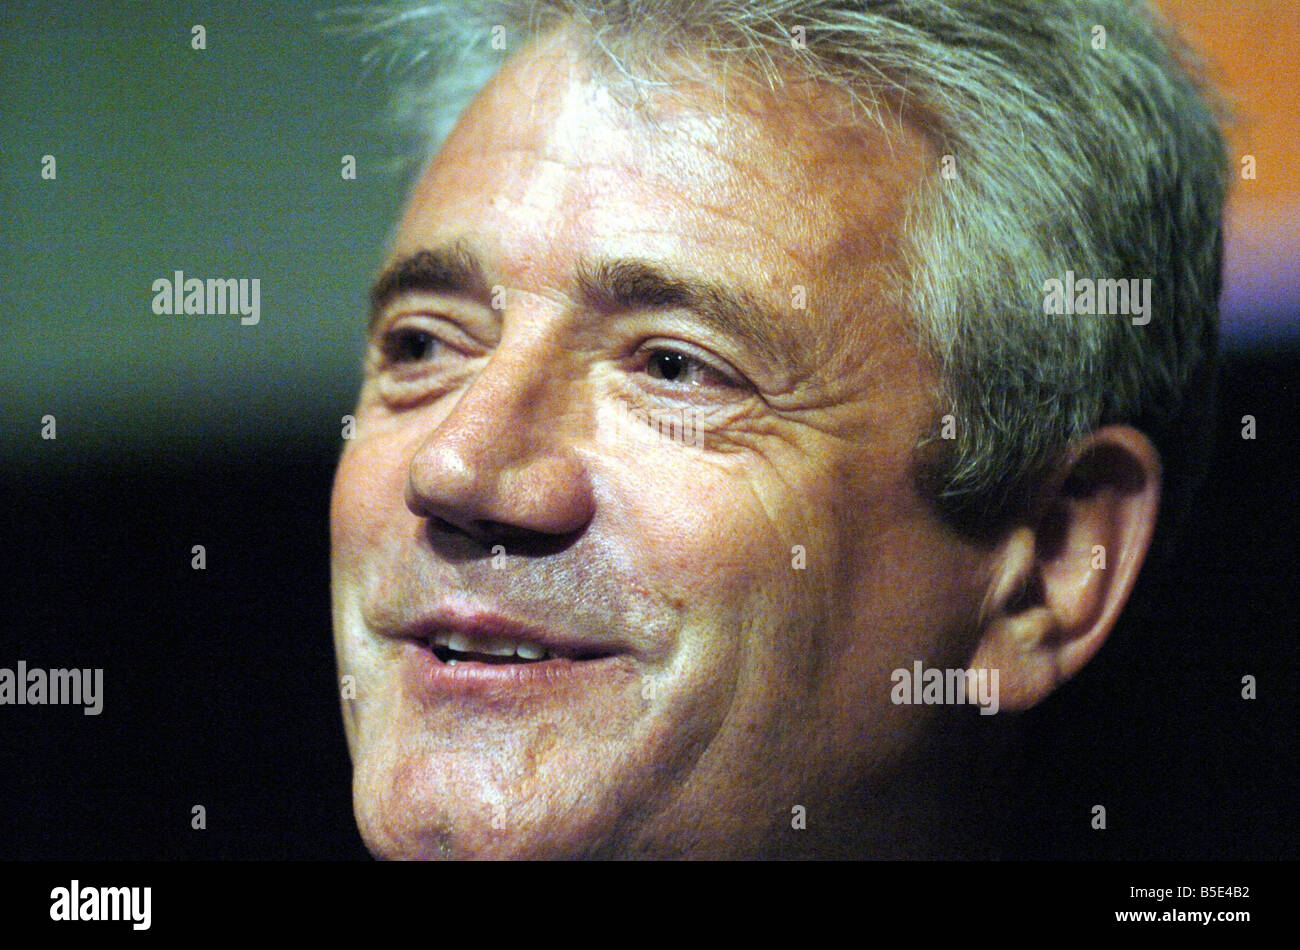 Kevin Keegan speakes to the delegates of the 13th congress of the European Association for Sports Management Sports Conference at The Sage Gateshead Stock Photo